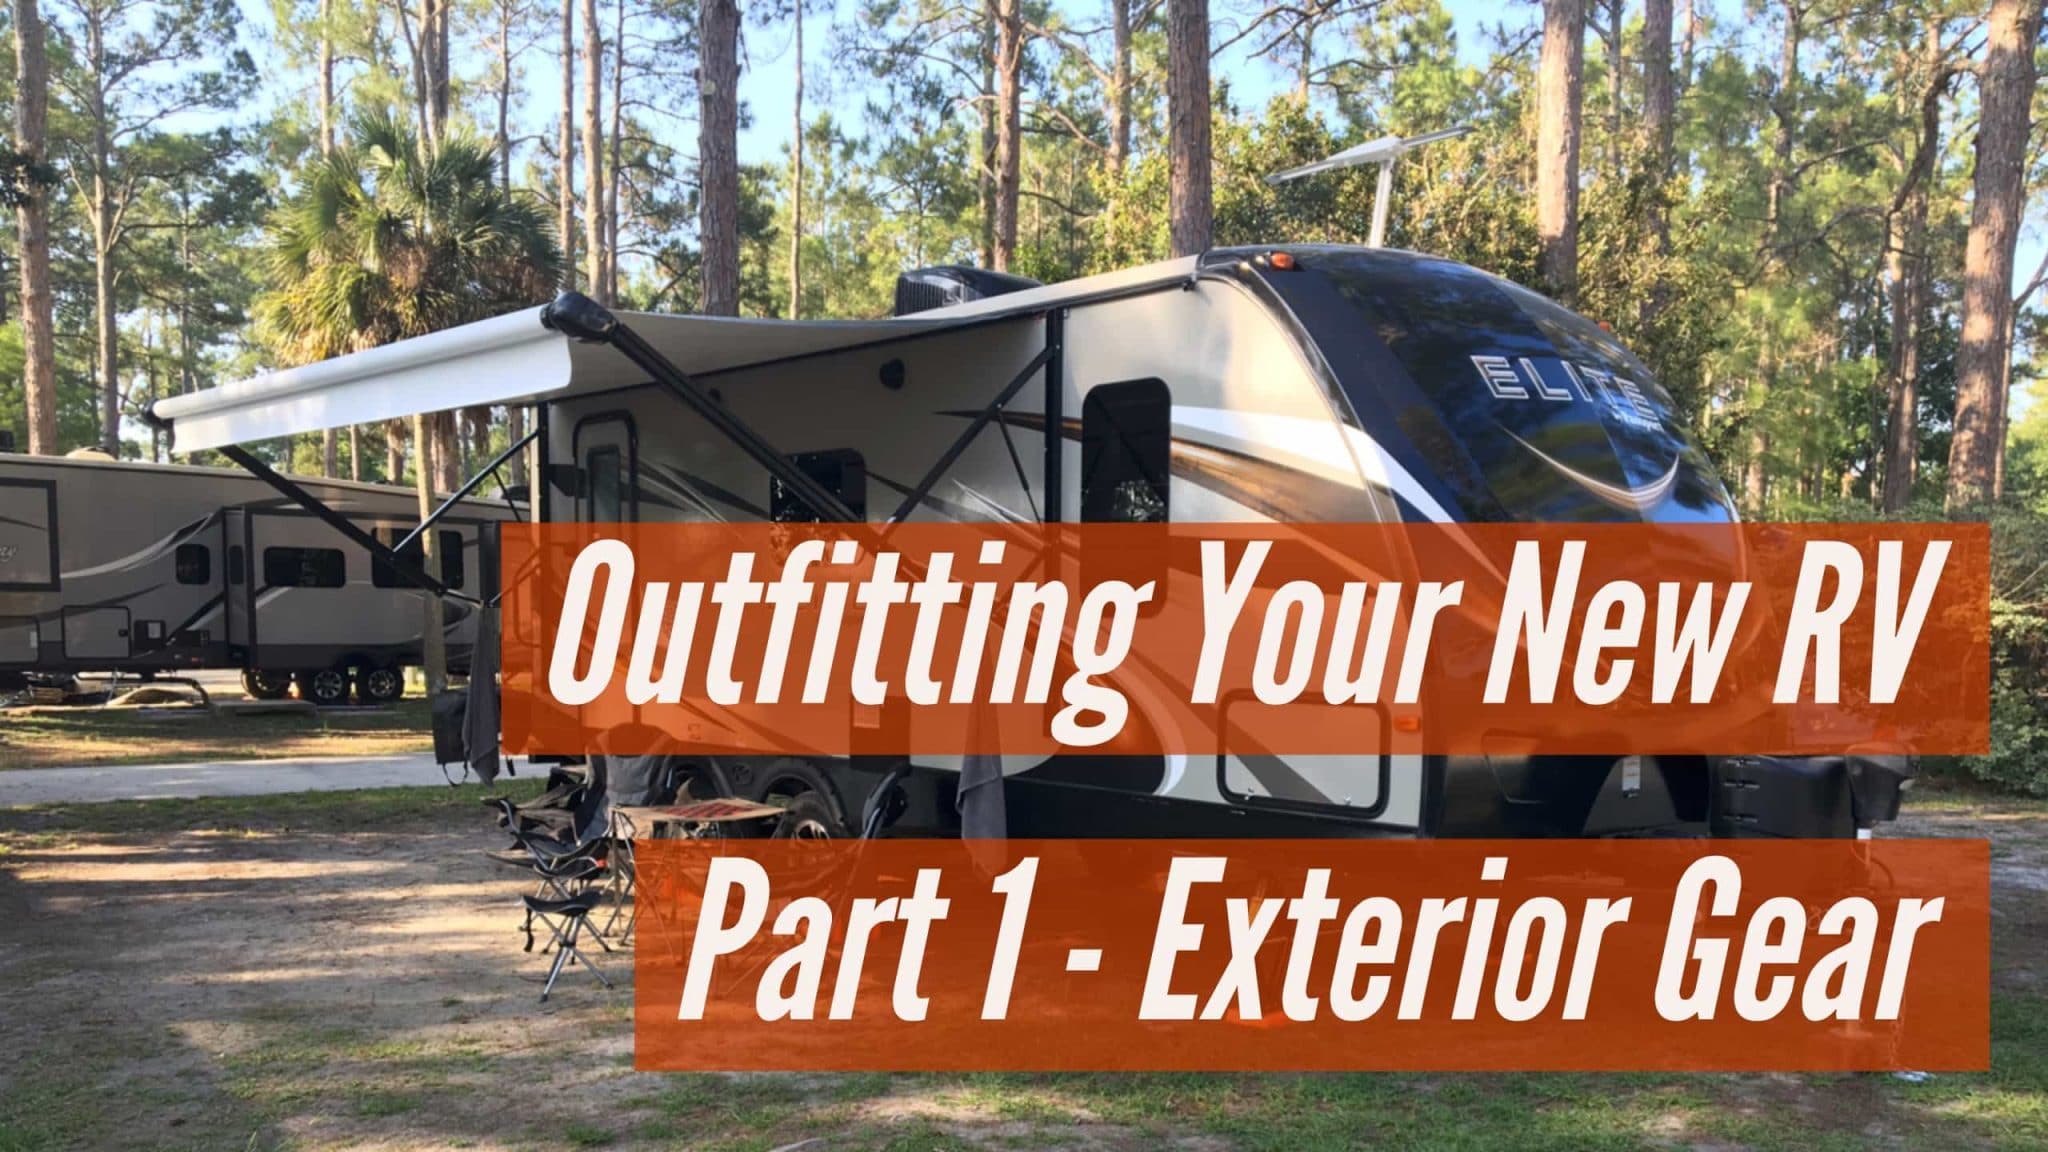 Outfitting Your New RV Part 1 - Exterior Gear